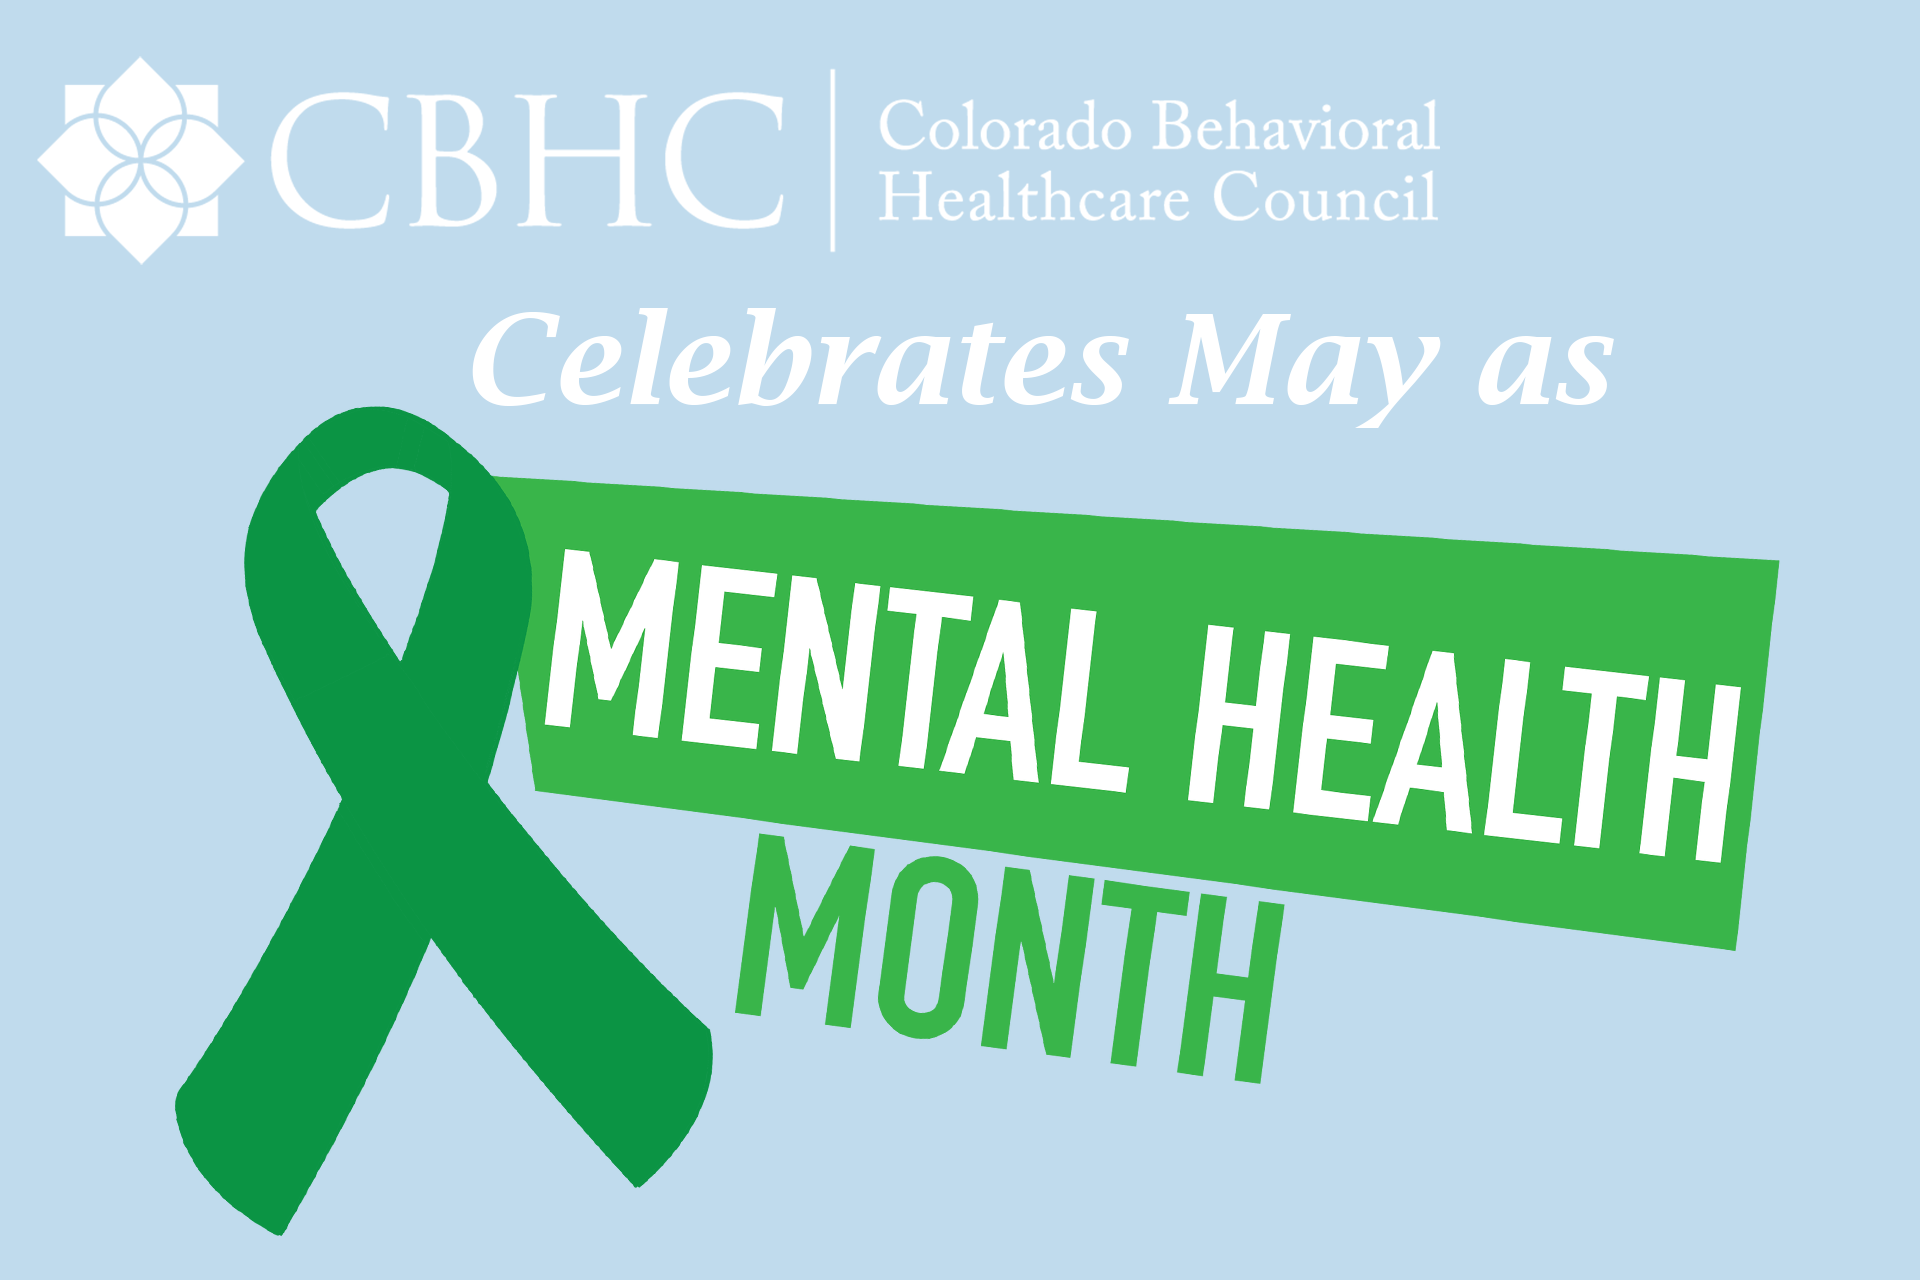 Colorado Celebrates Mental Health Month With Event Featuring our New Behavioral Health Commissioner